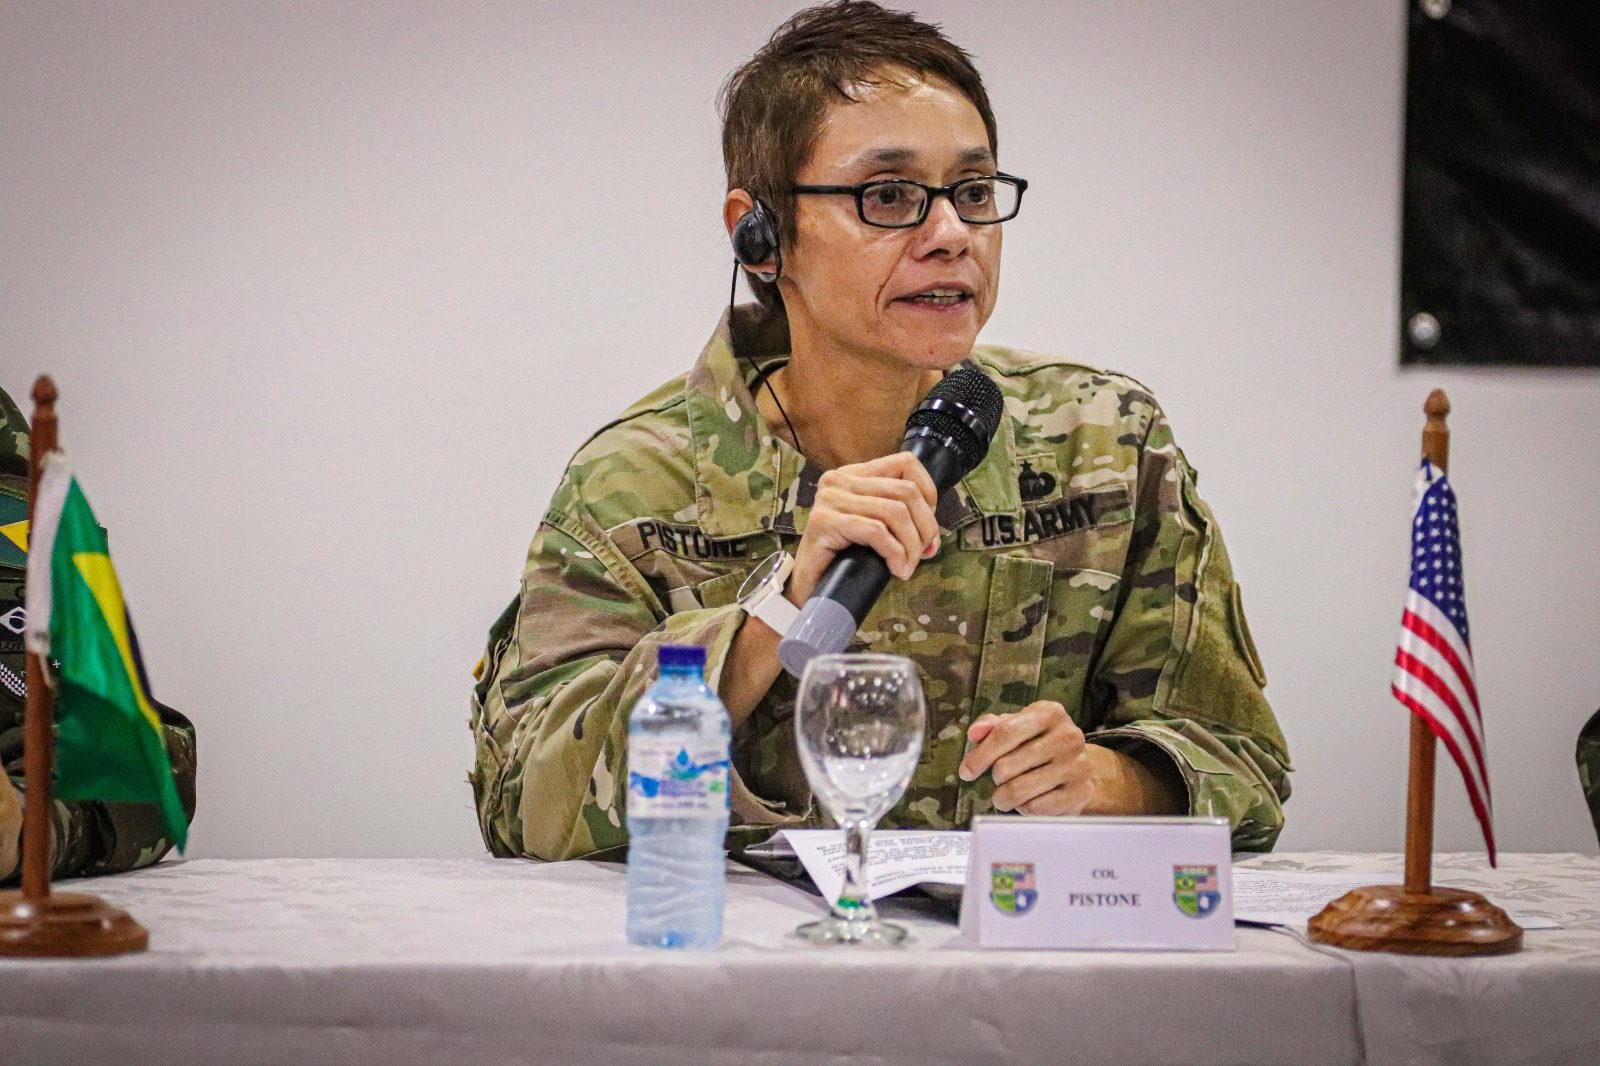 CORE 23 discusses the role of military women